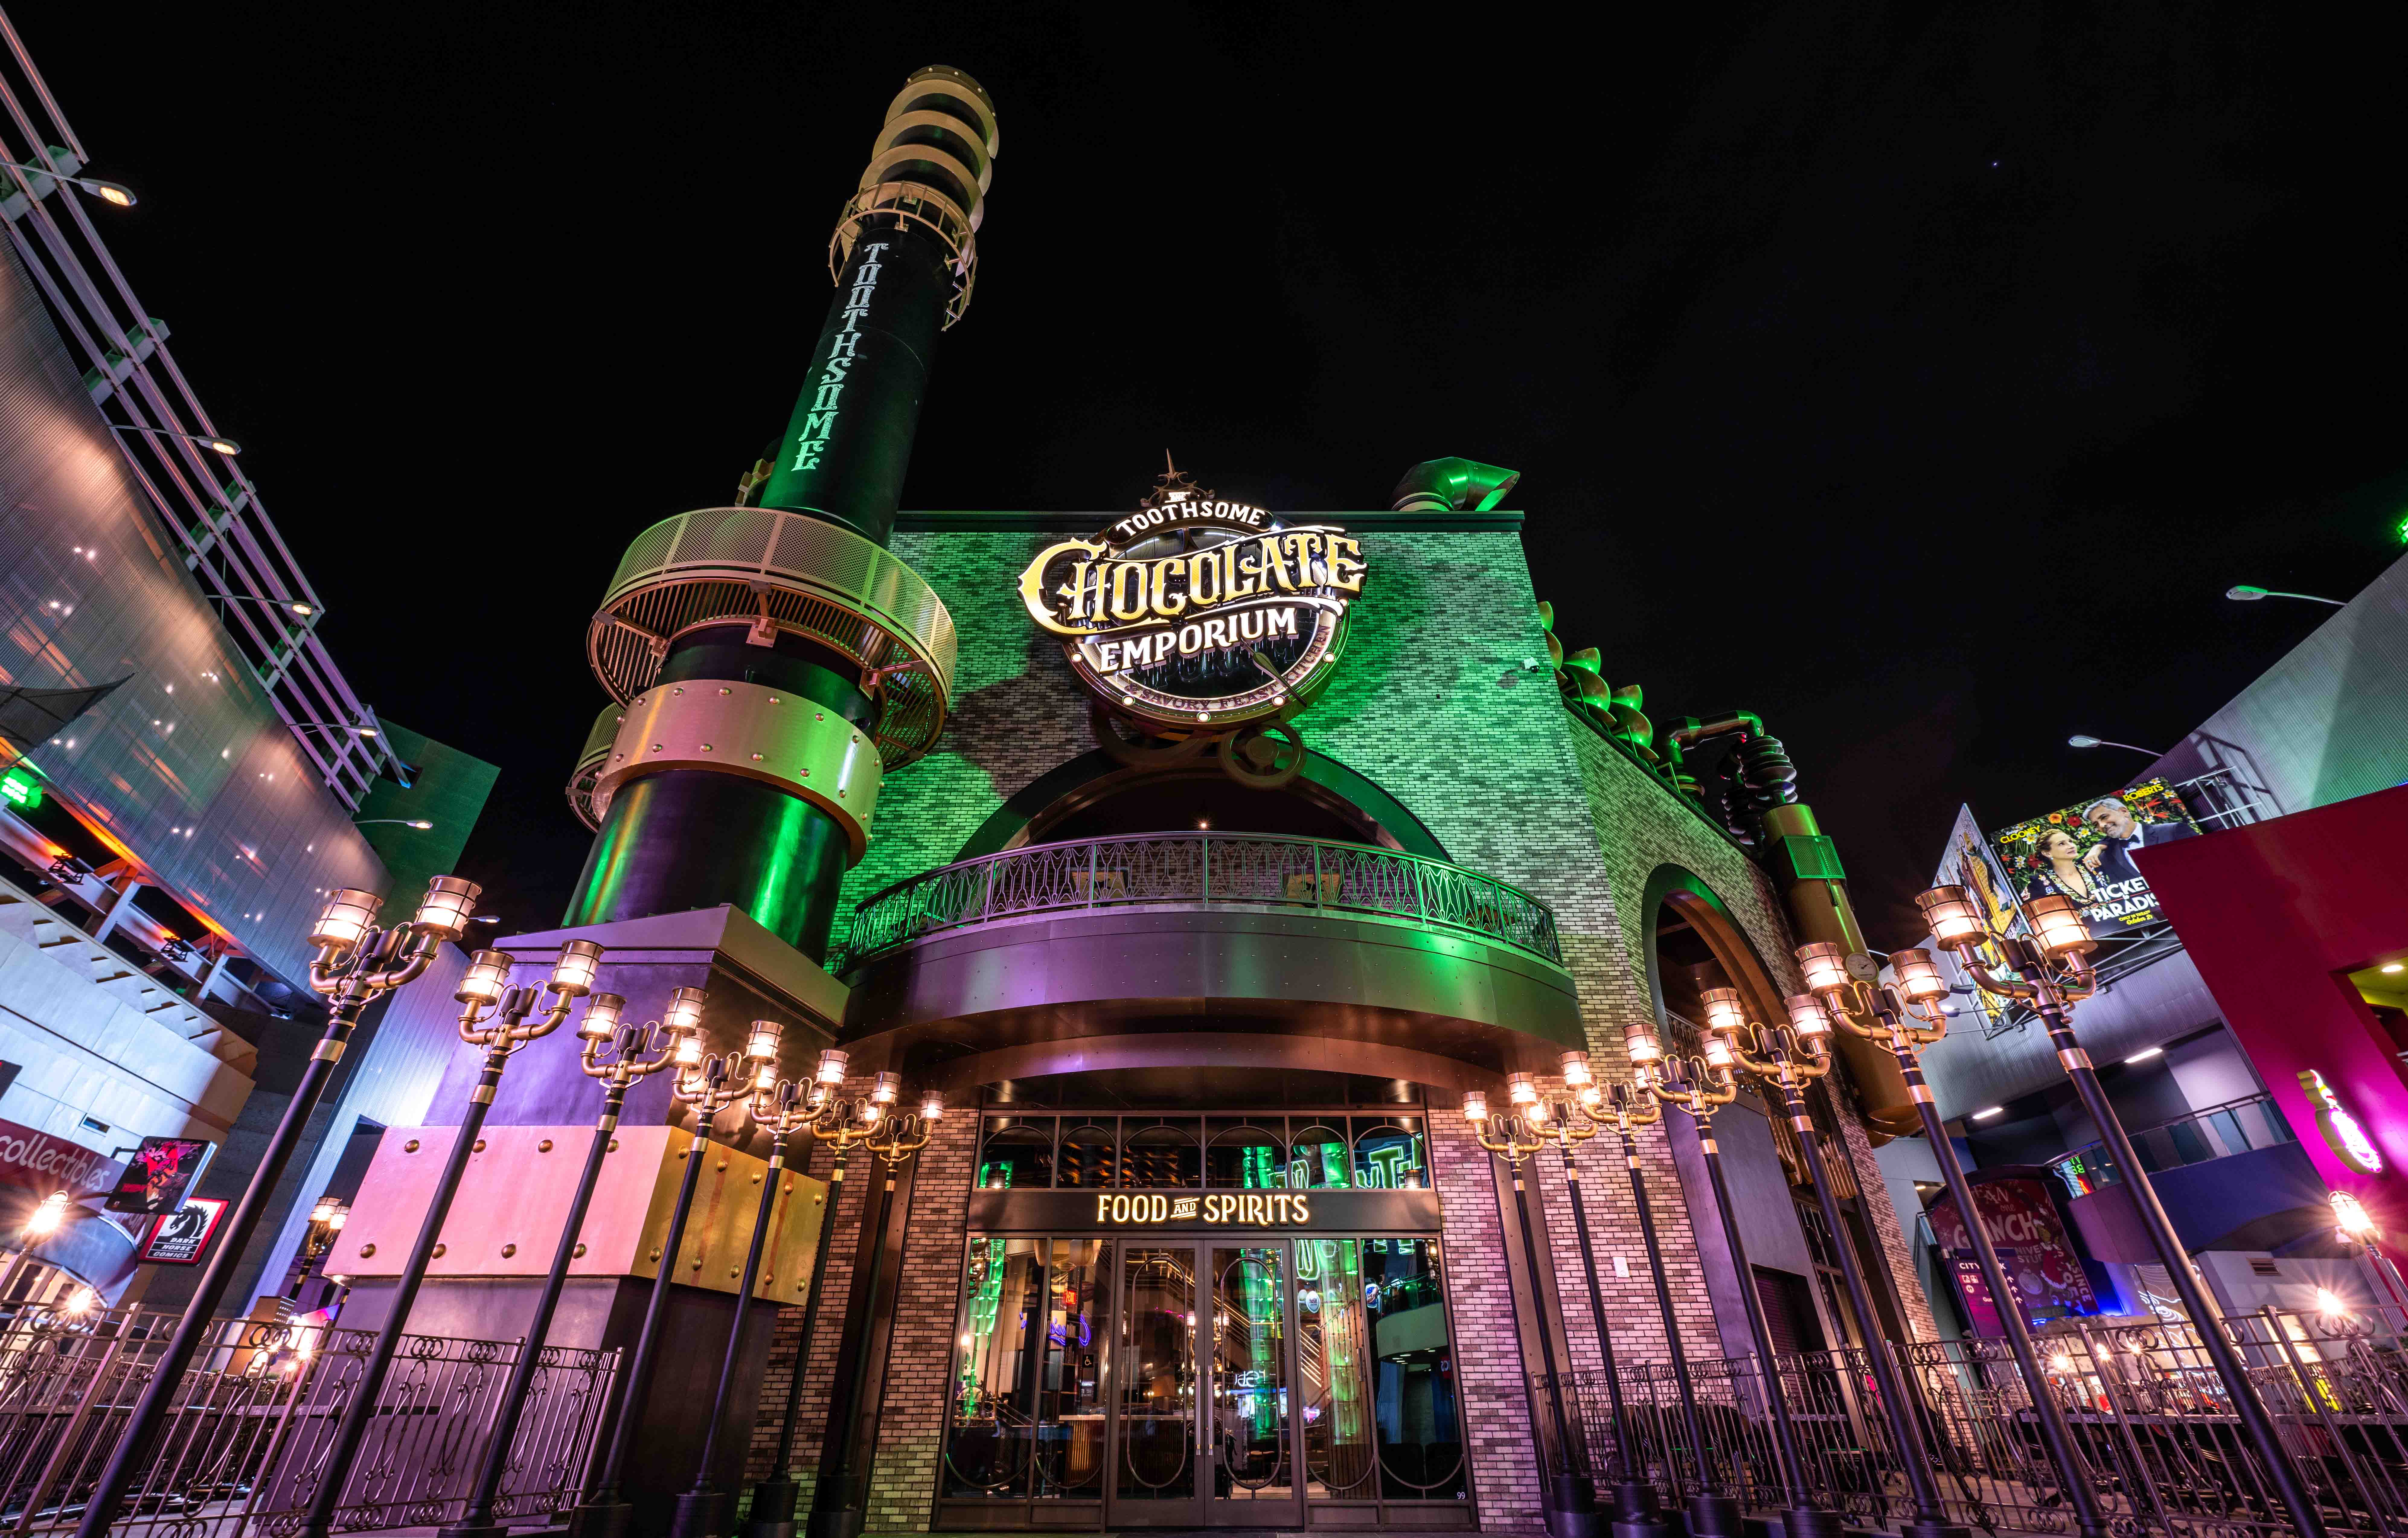 The Innovative Toothsome Chocolate Emporium & Savory Feast Kitchen is Now Open